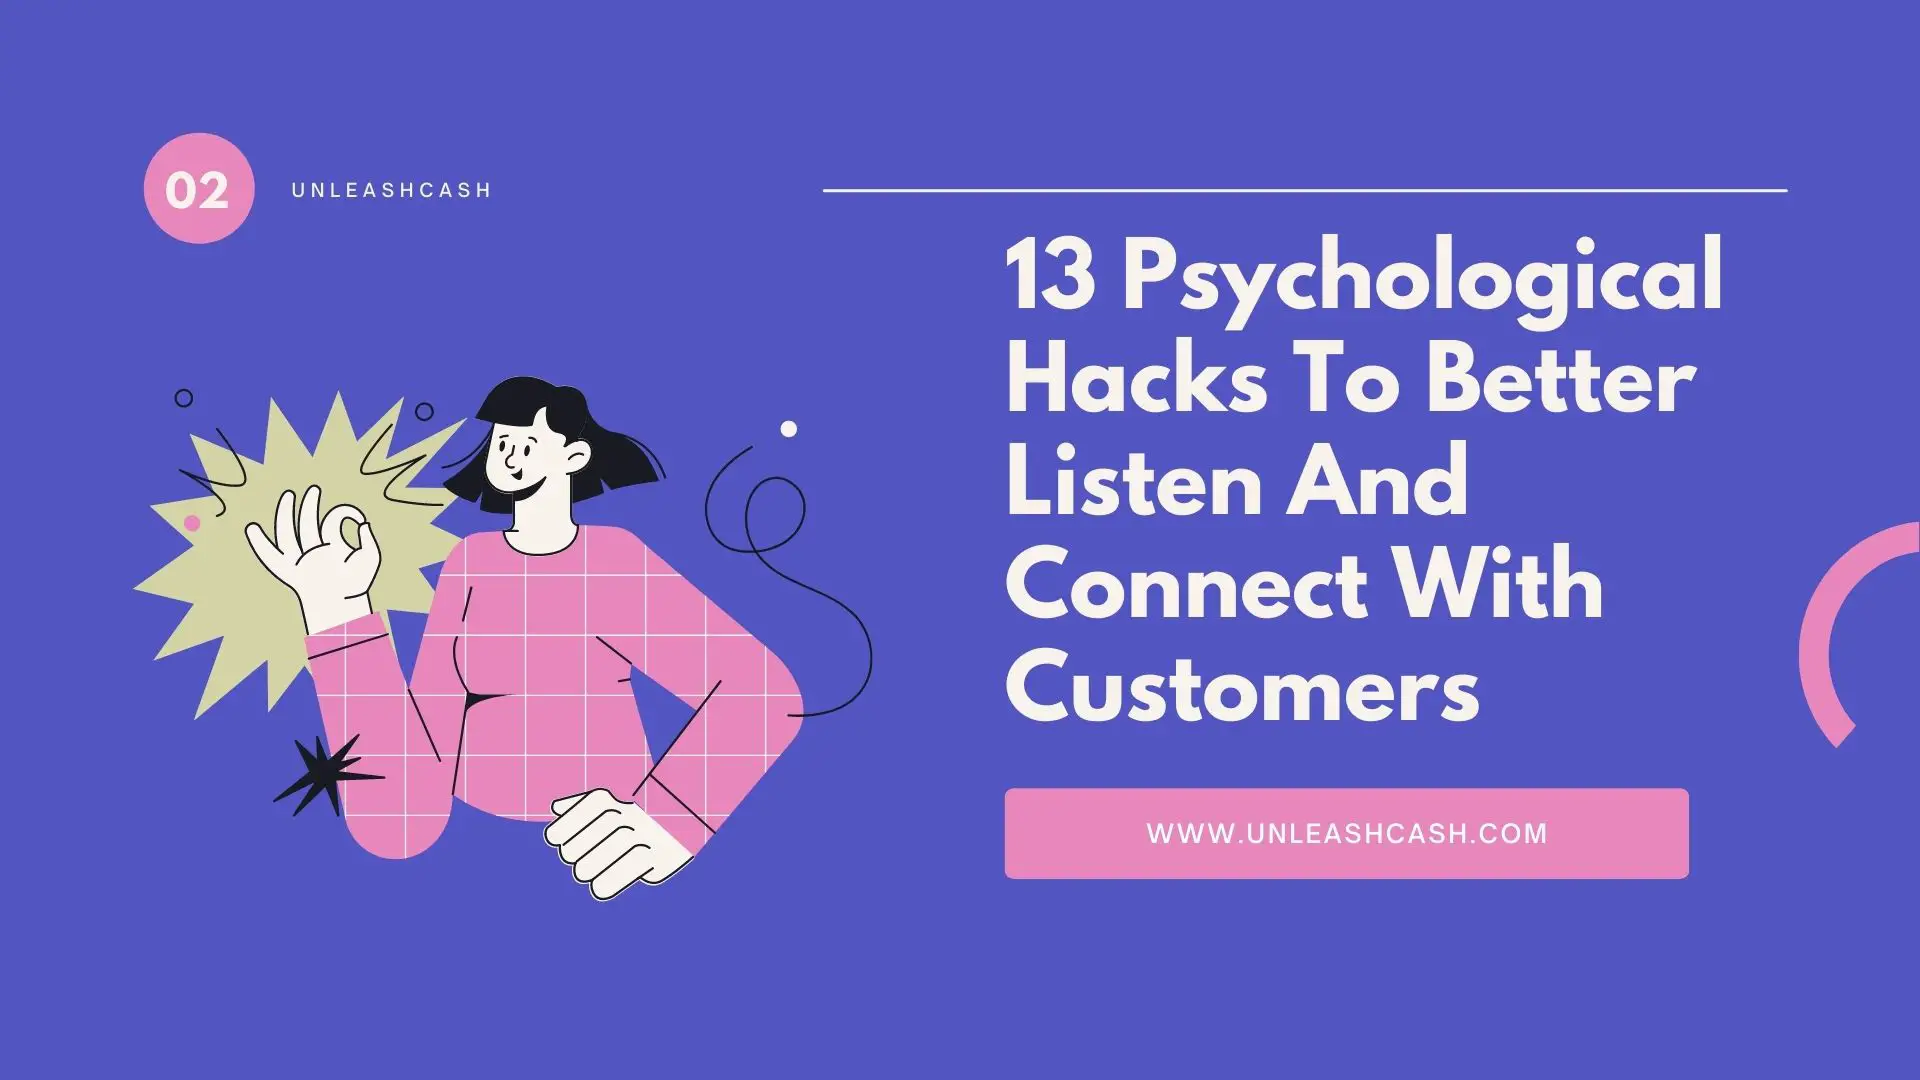 13 Psychological Hacks To Better Listen And Connect With Customers